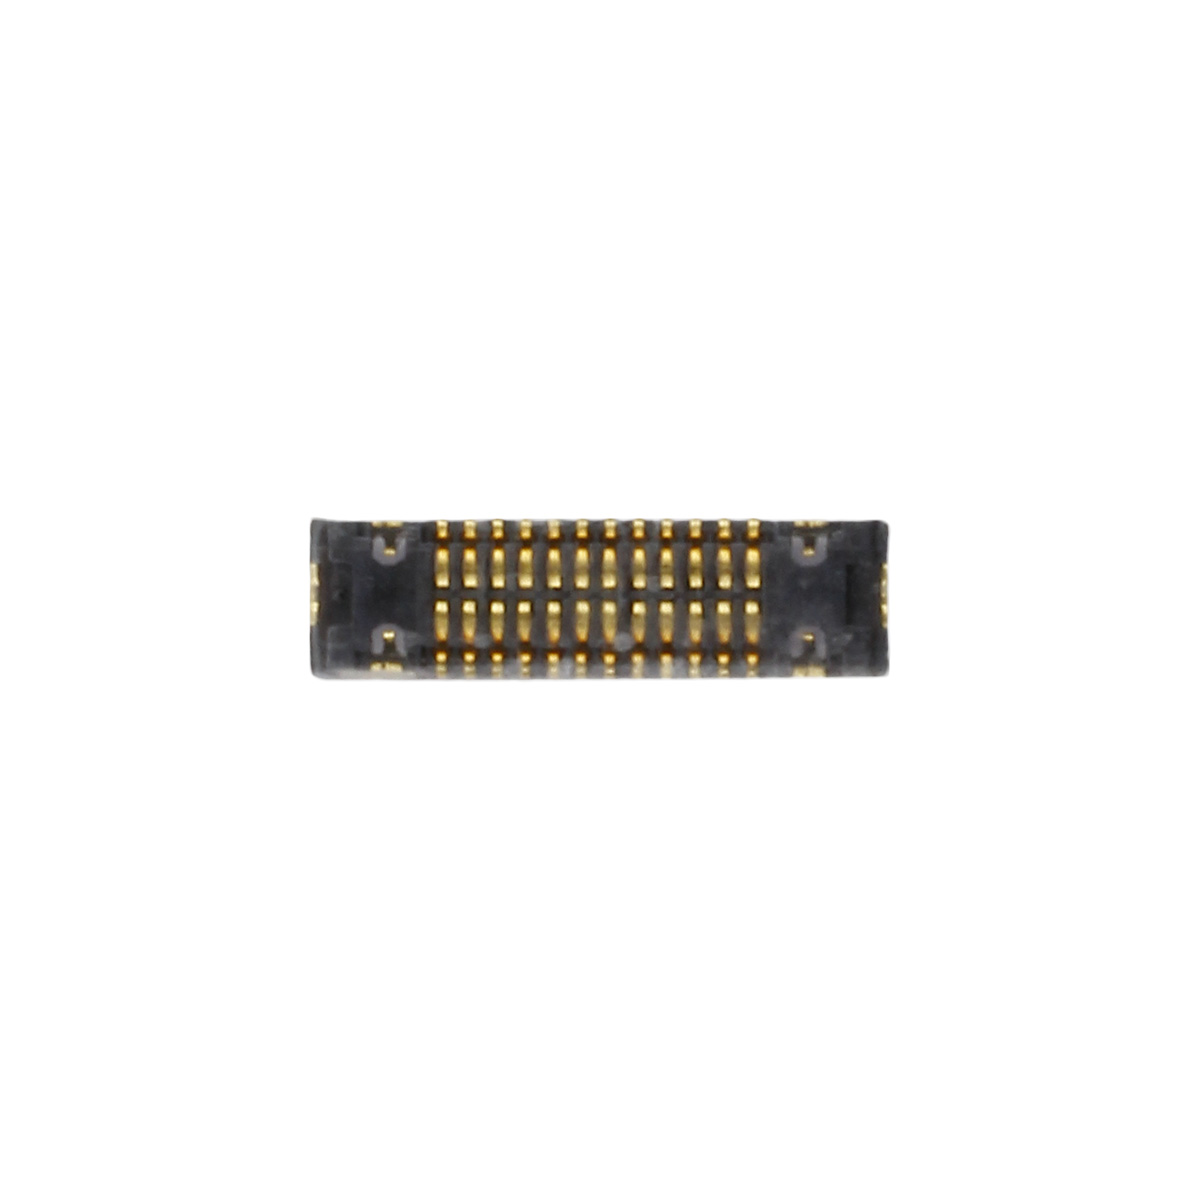 FPC Connector for Home Button Compatible with iPhone 7